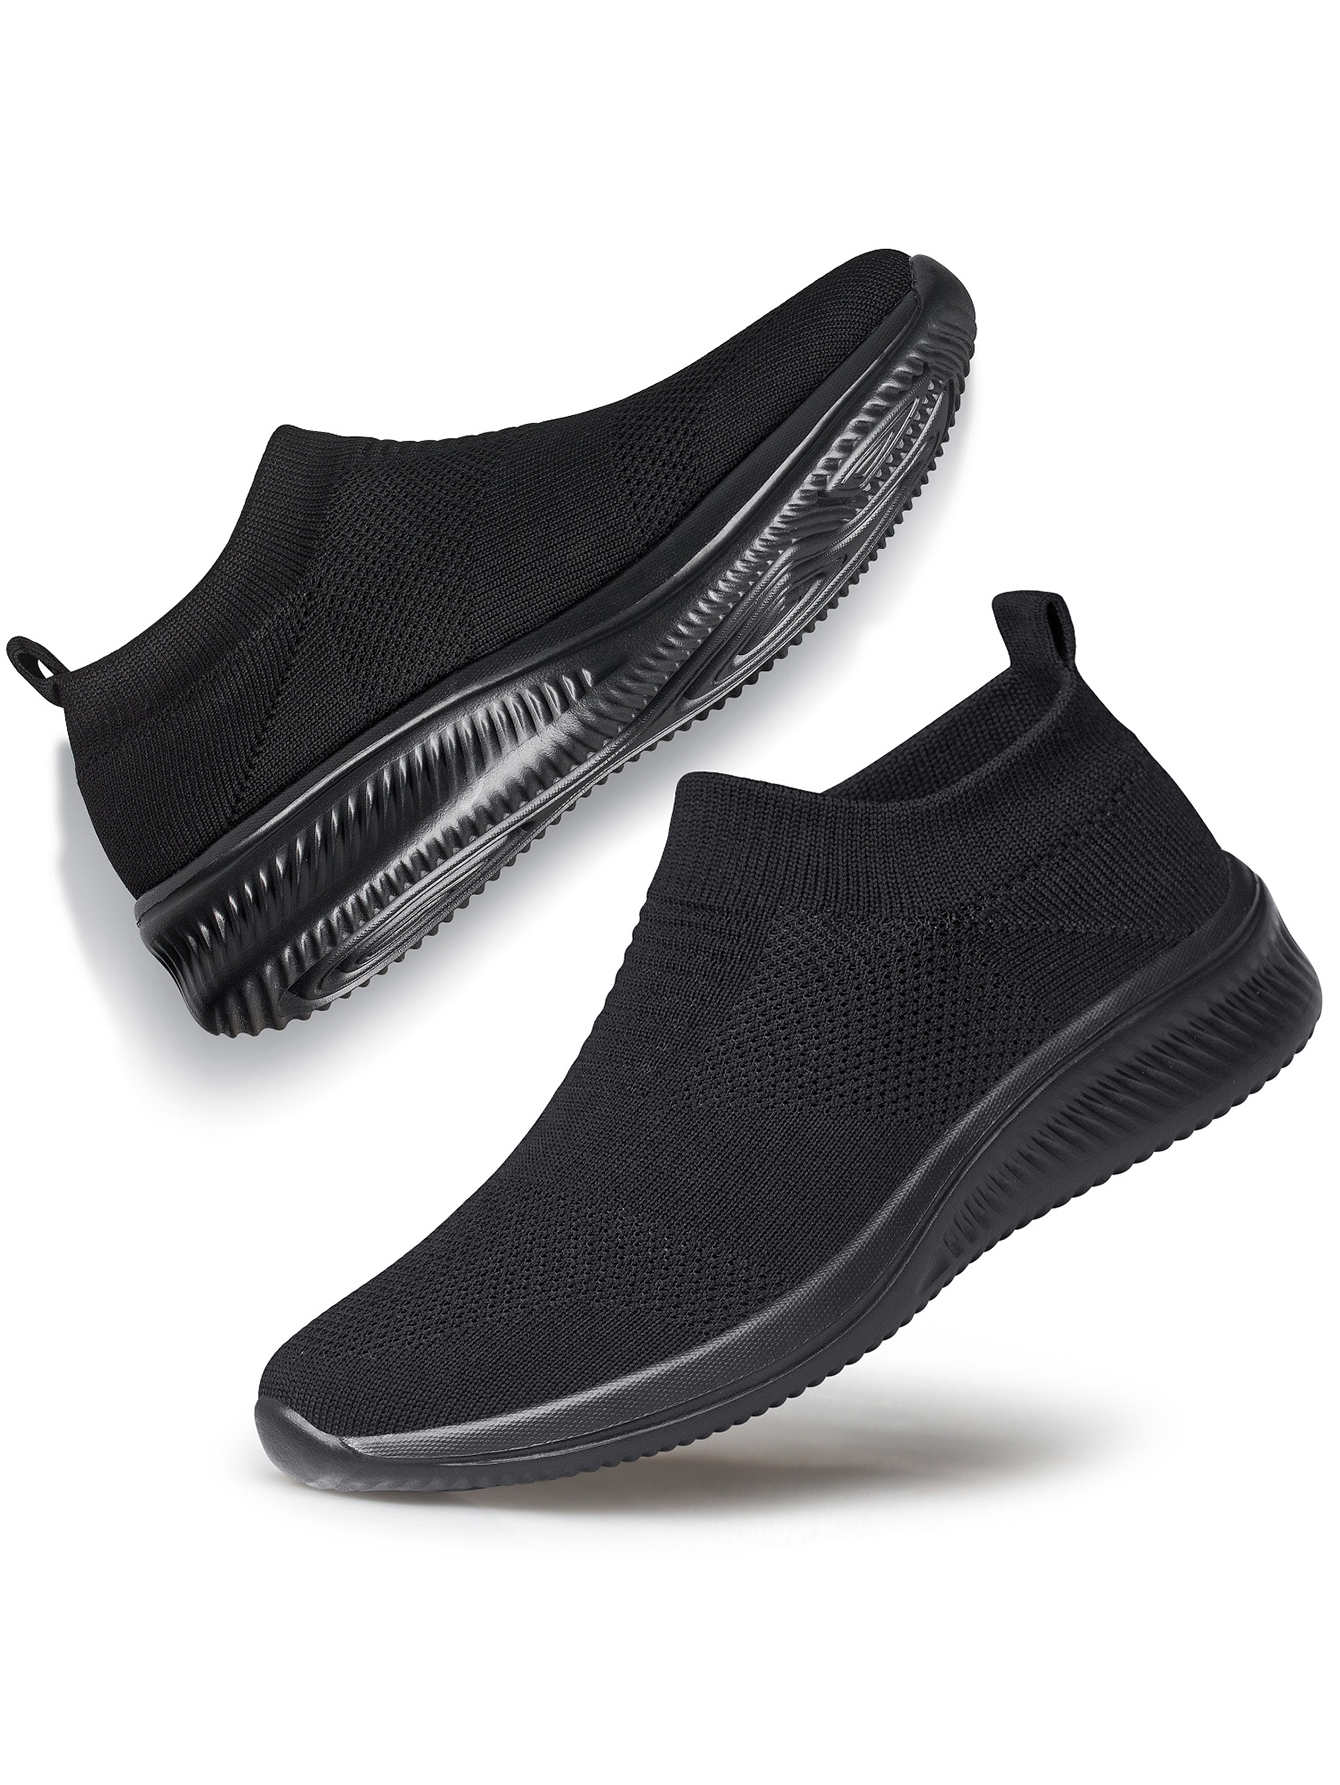 Men's Blade Sneakers Running Shoes Slip-on Sneakers With Shoelaces ...